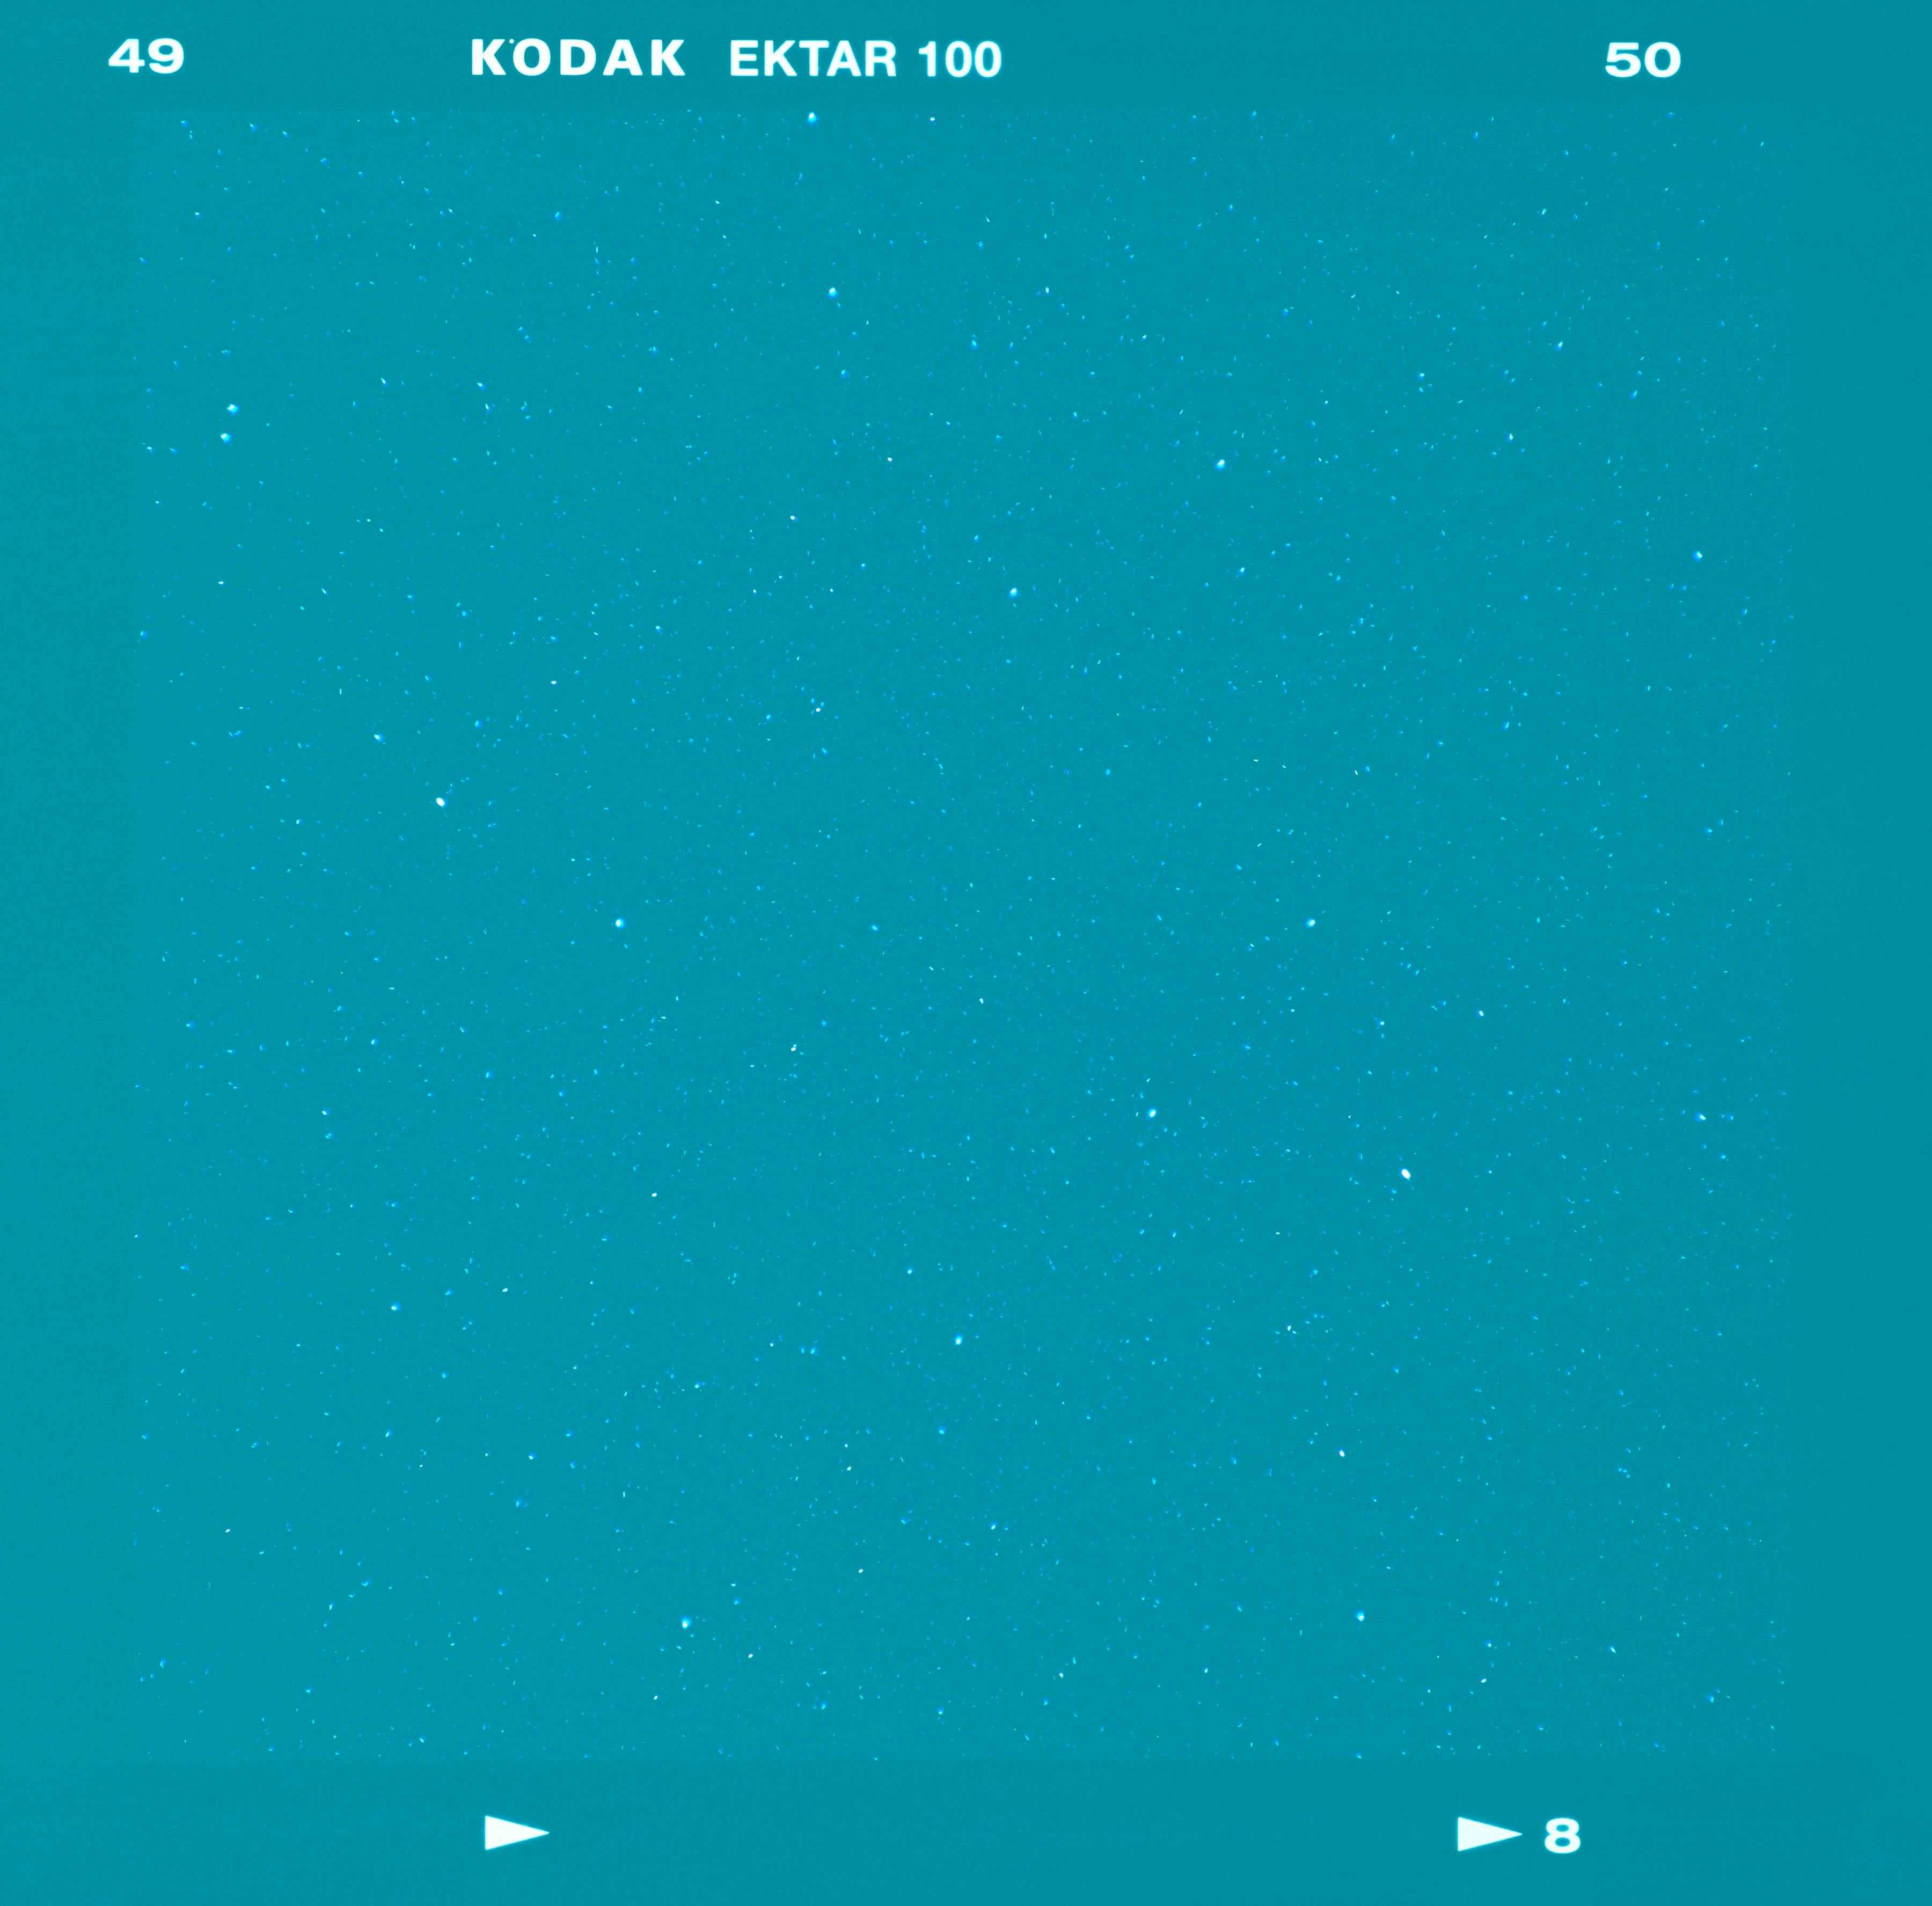 A square of turquoise blue with a smattering of white specs resembling a starry sky. White text at the top reads “49 KODAK EKTAR 100 50.” 